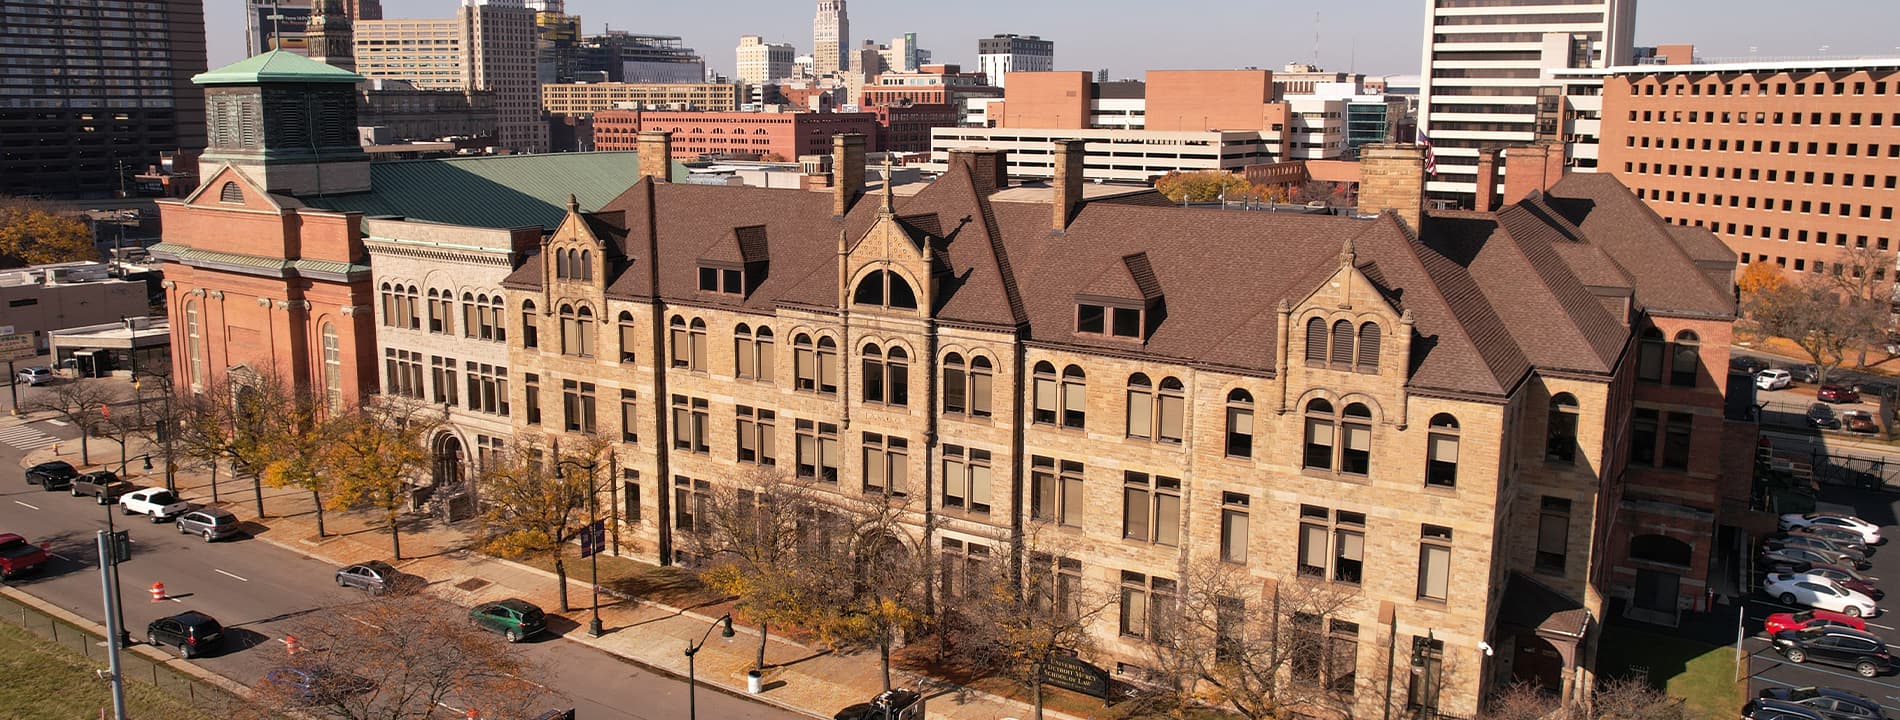 An aerial photo of the School of Law in downtown ɫۺϾþ with cars and other buildings pictured on a sunny day.